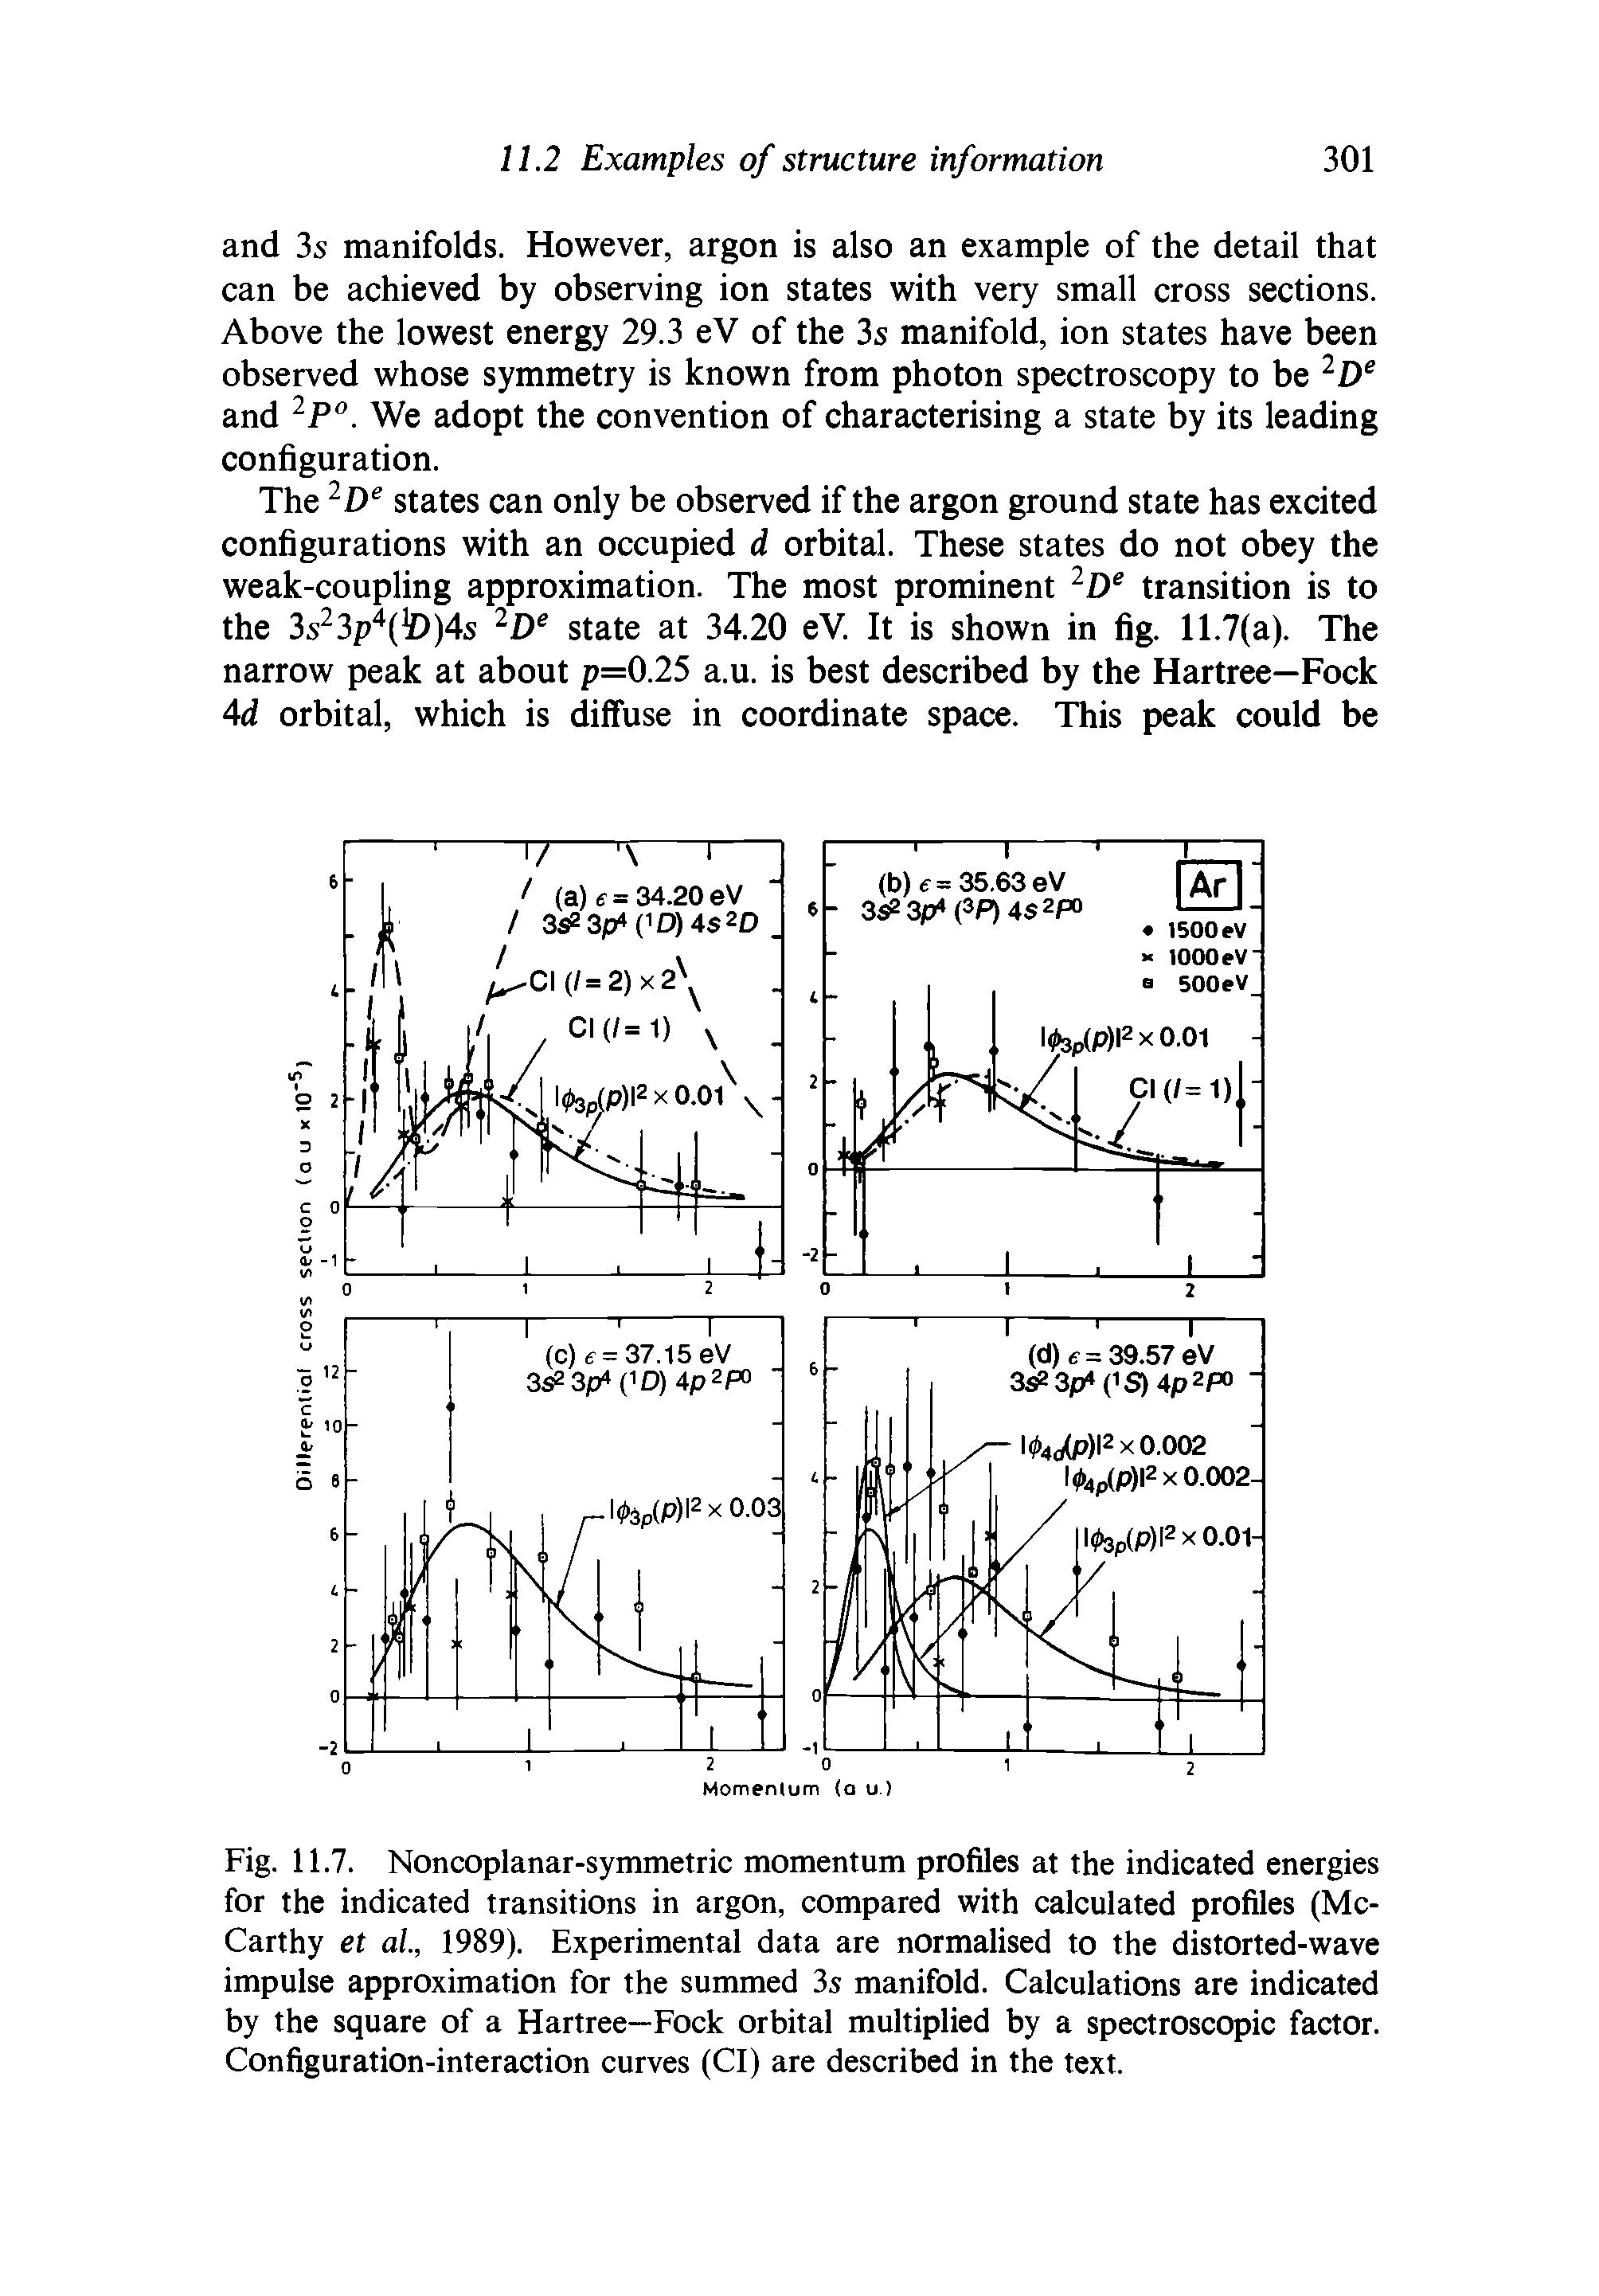 Fig. 11.7. Noncoplanar-symmetric momentum profiles at the indicated energies for the indicated transitions in argon, compared with calculated profiles (McCarthy et ai, 1989). Experimental data are normalised to the distorted-wave impulse approximation for the summed 3s manifold. Calculations are indicated by the square of a Hartree—Fock orbital multiplied by a spectroscopic factor. Configuration-interaction curves (Cl) are described in the text.